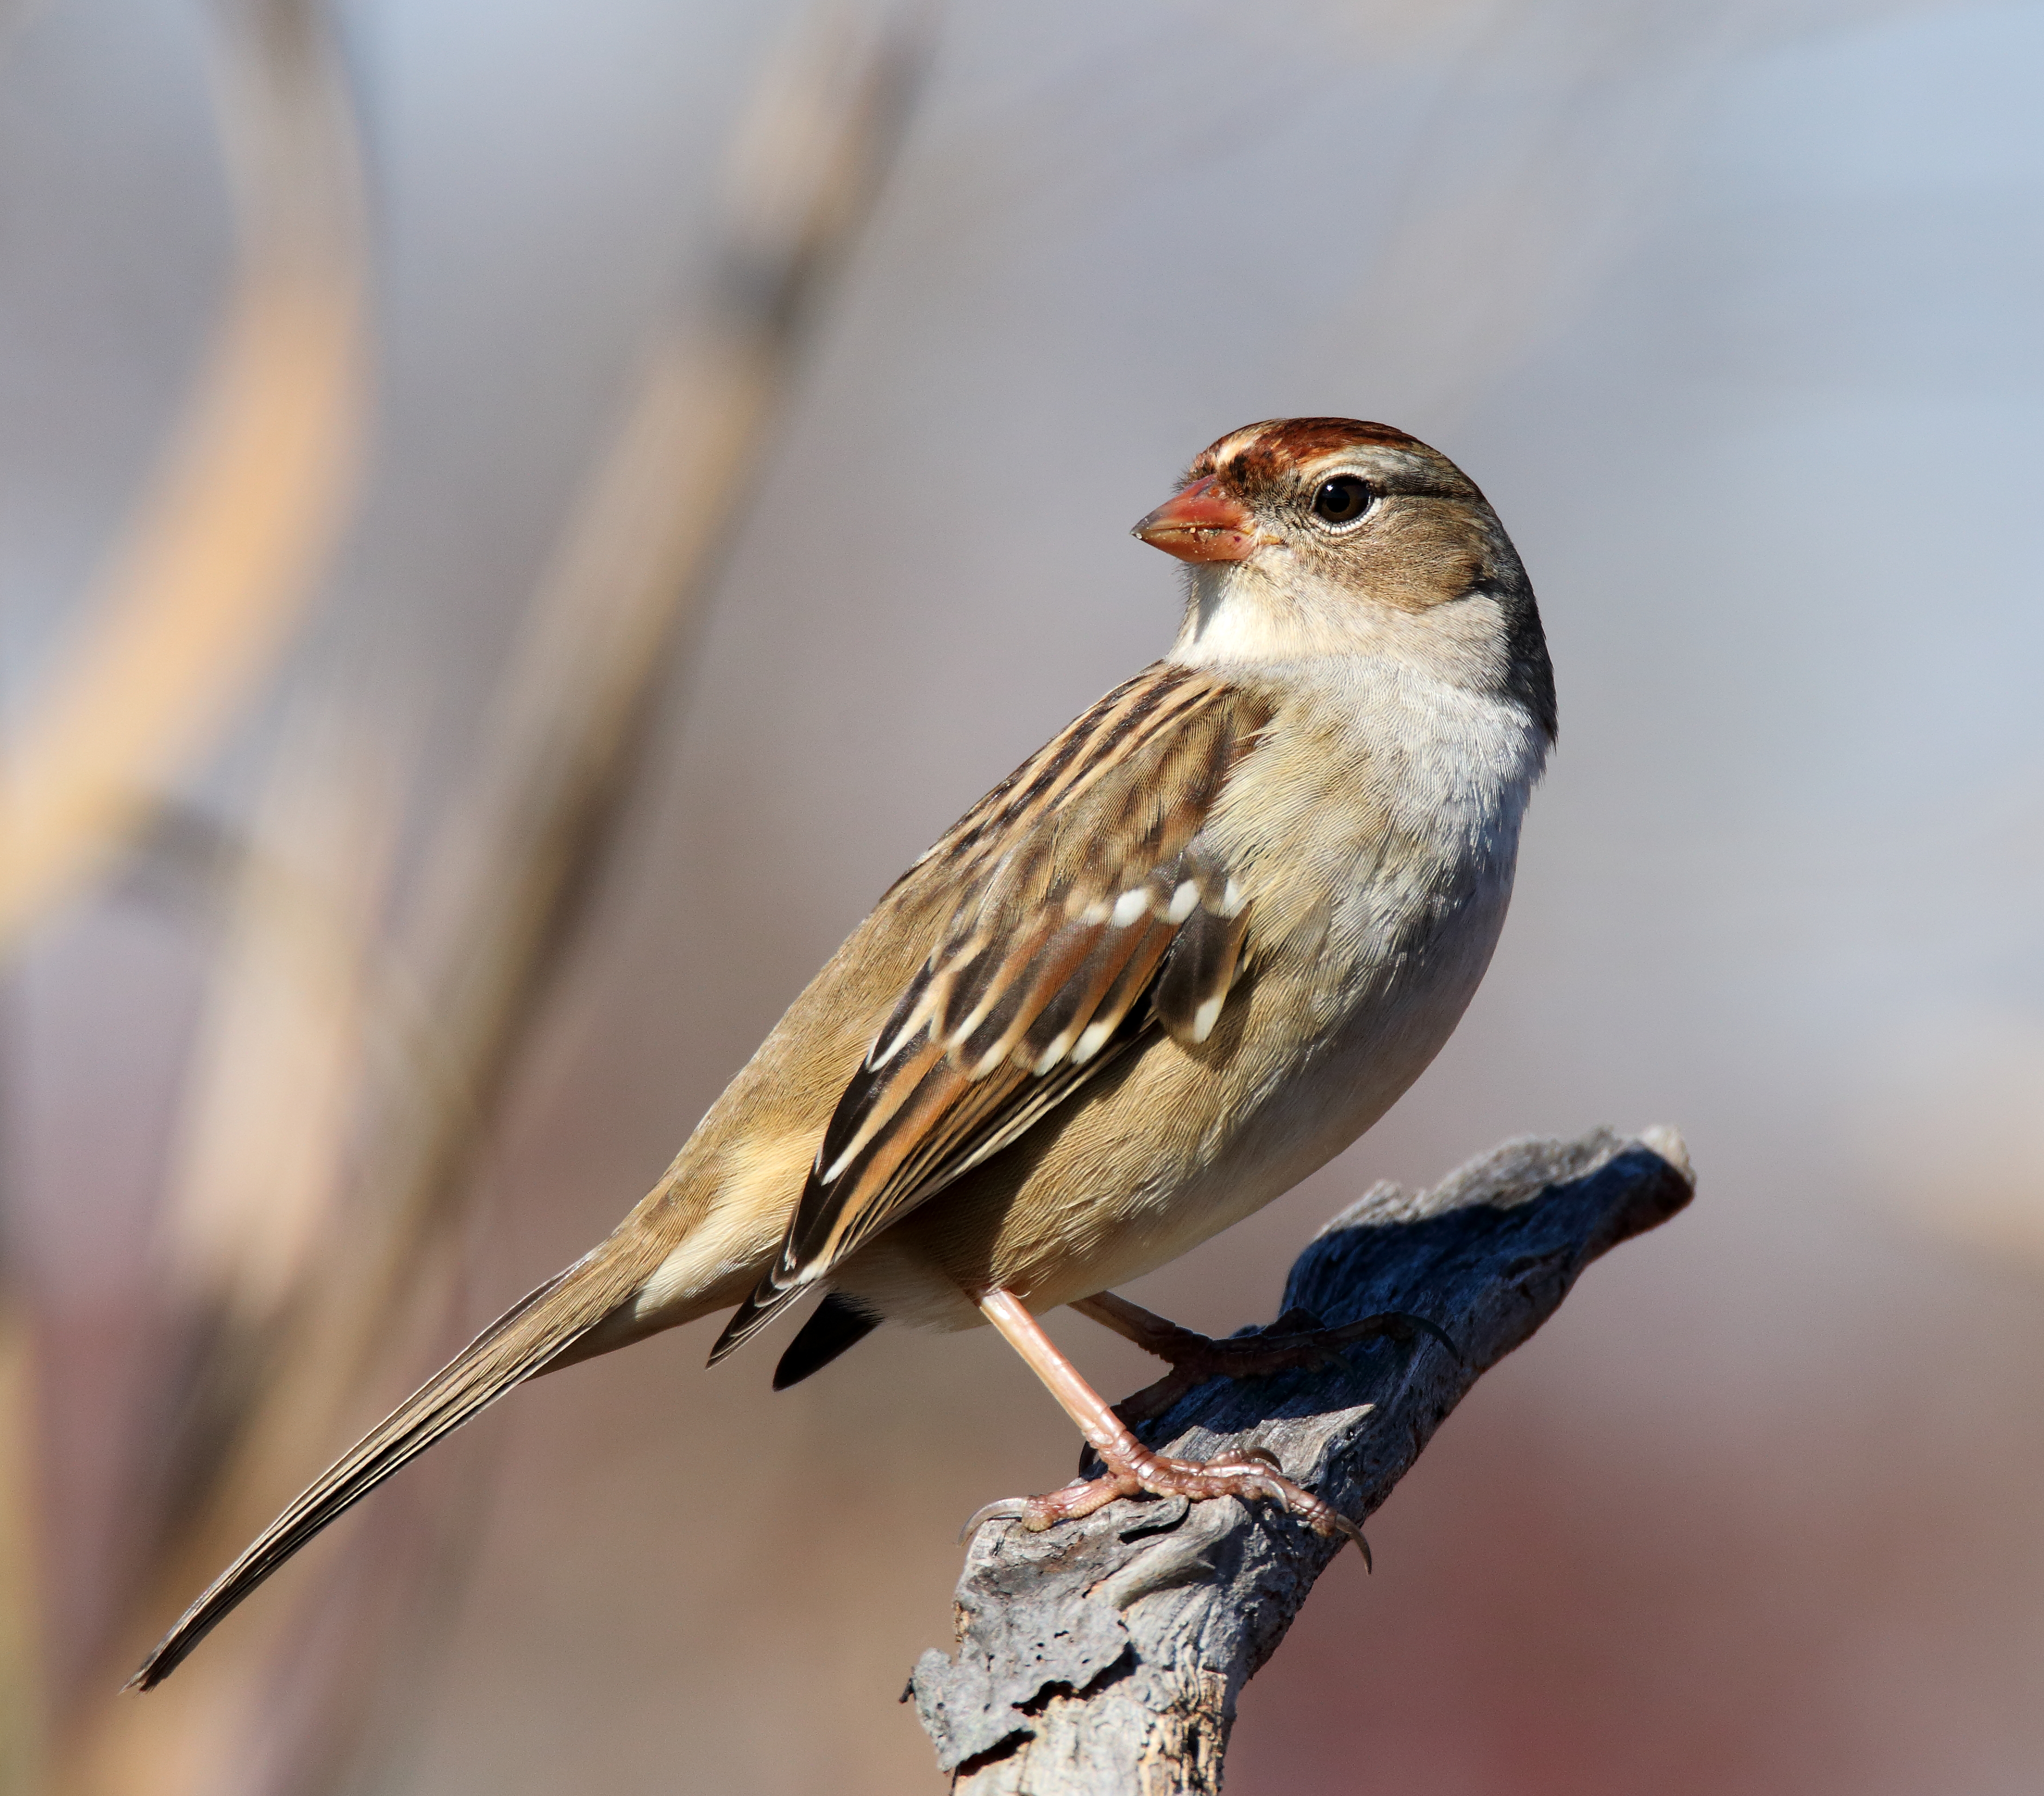 The immature White-crowned Sparrow has a chestnut and tan striped cap. Photo: Isaac Grant